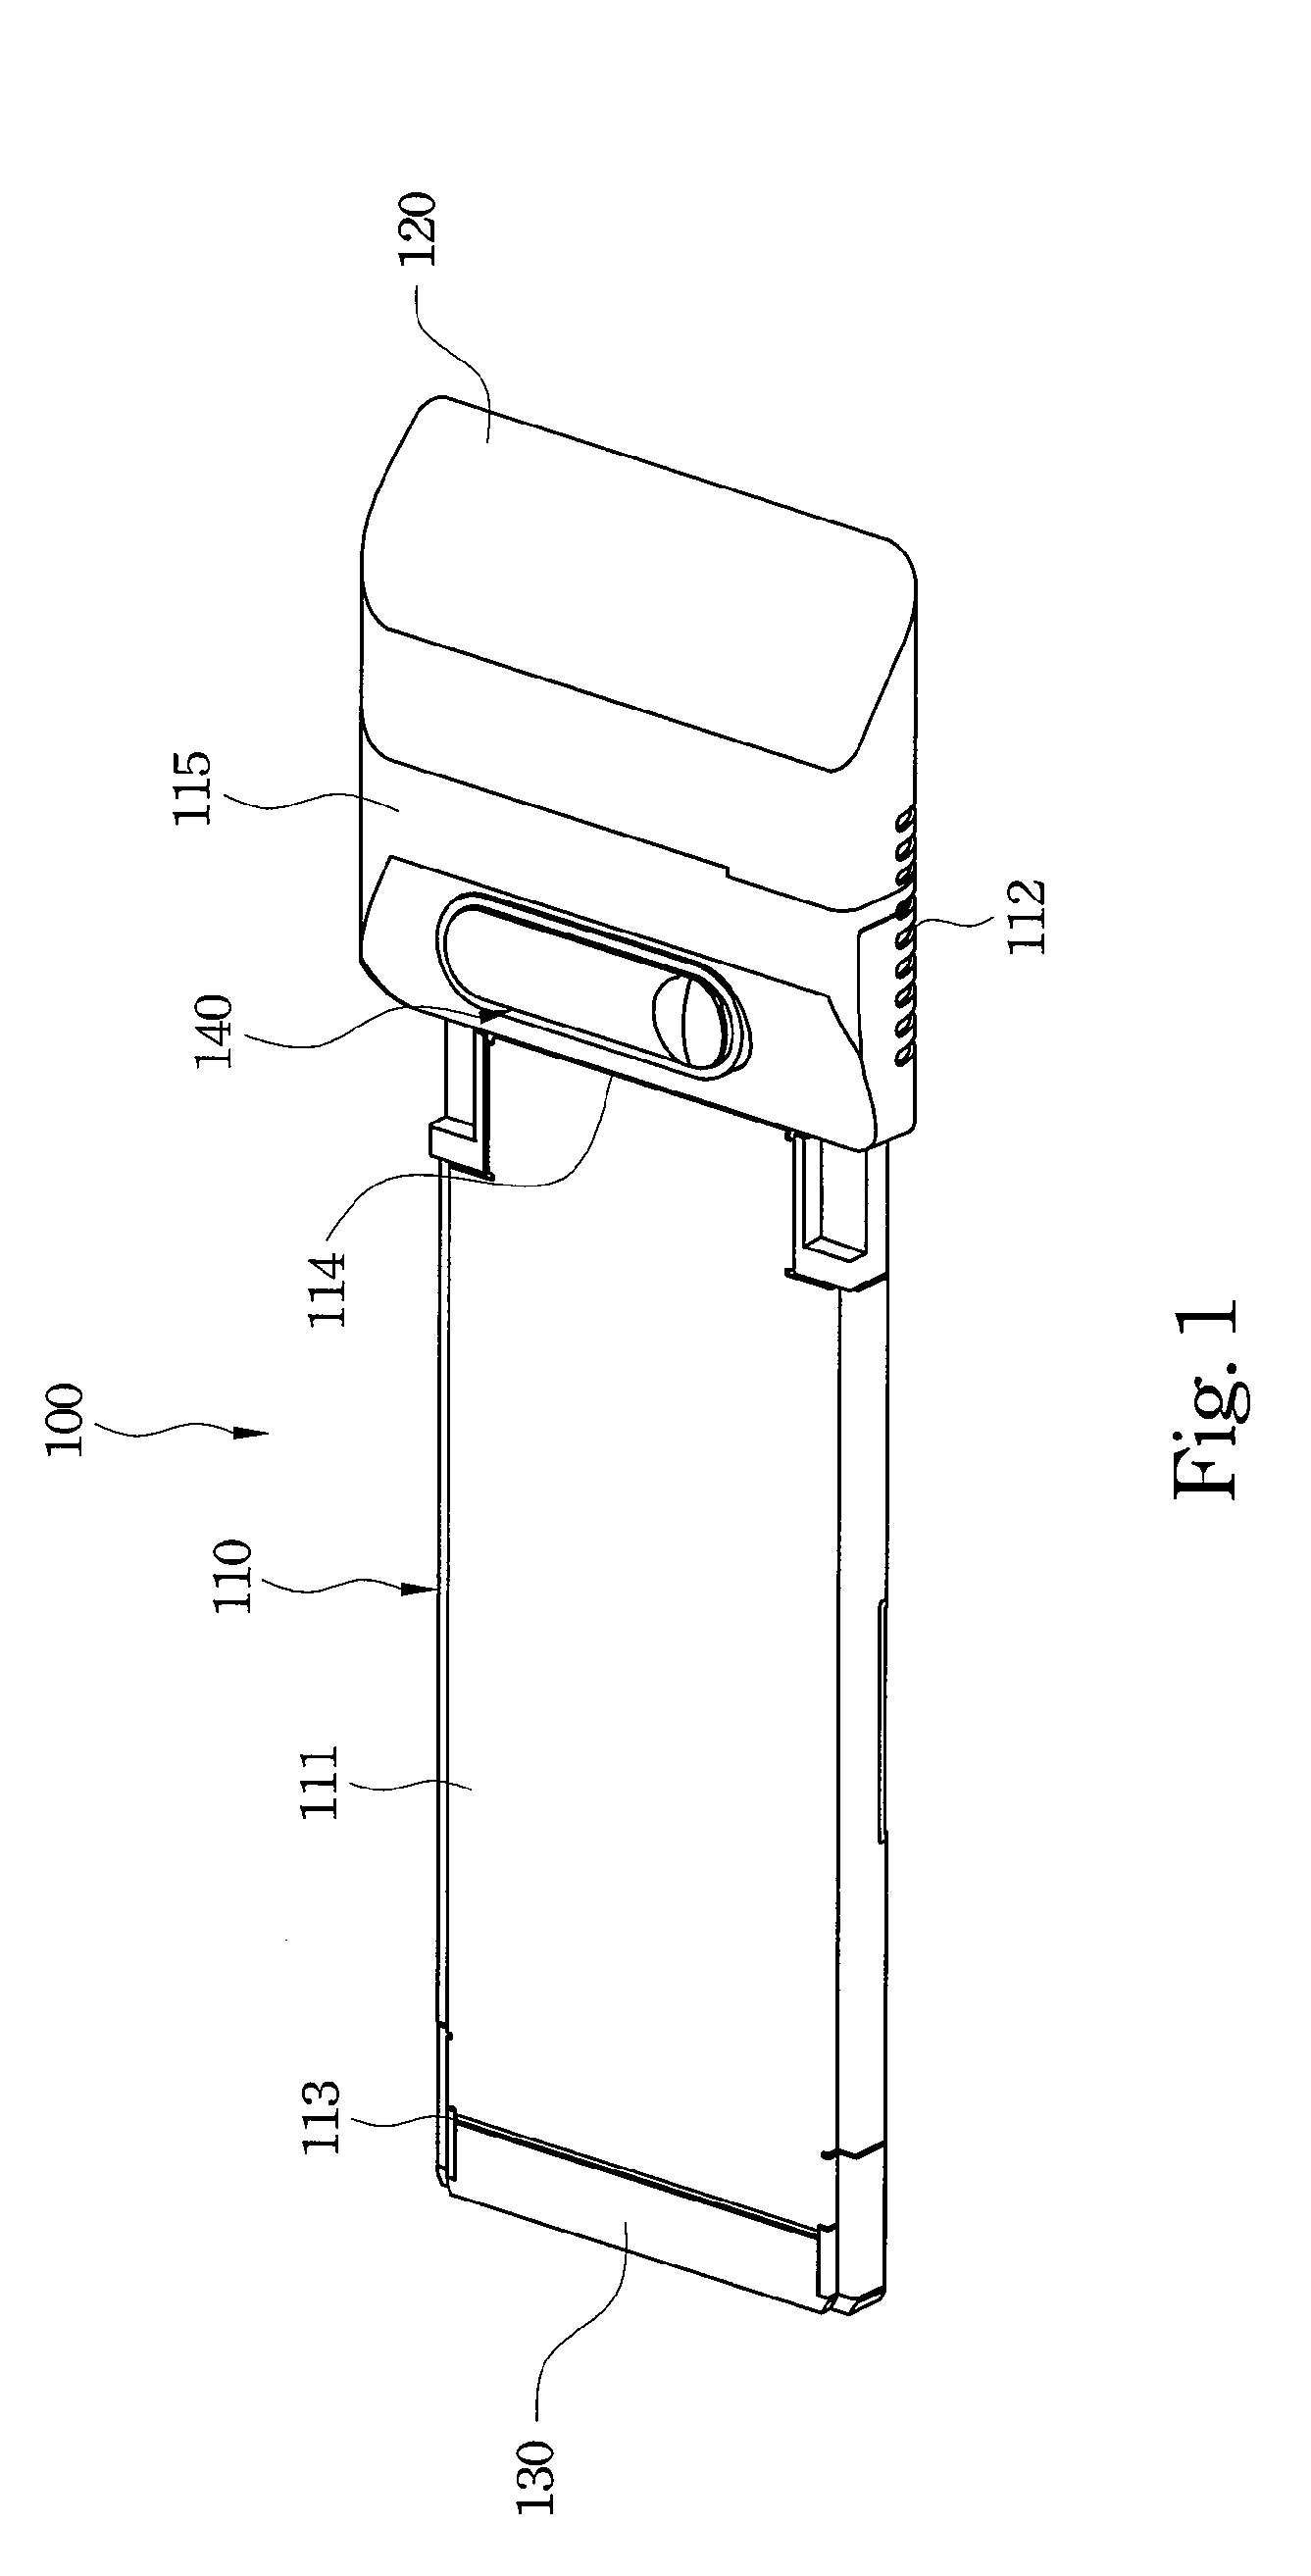 Wireless Card and External Antenna Connecting Device of the Same